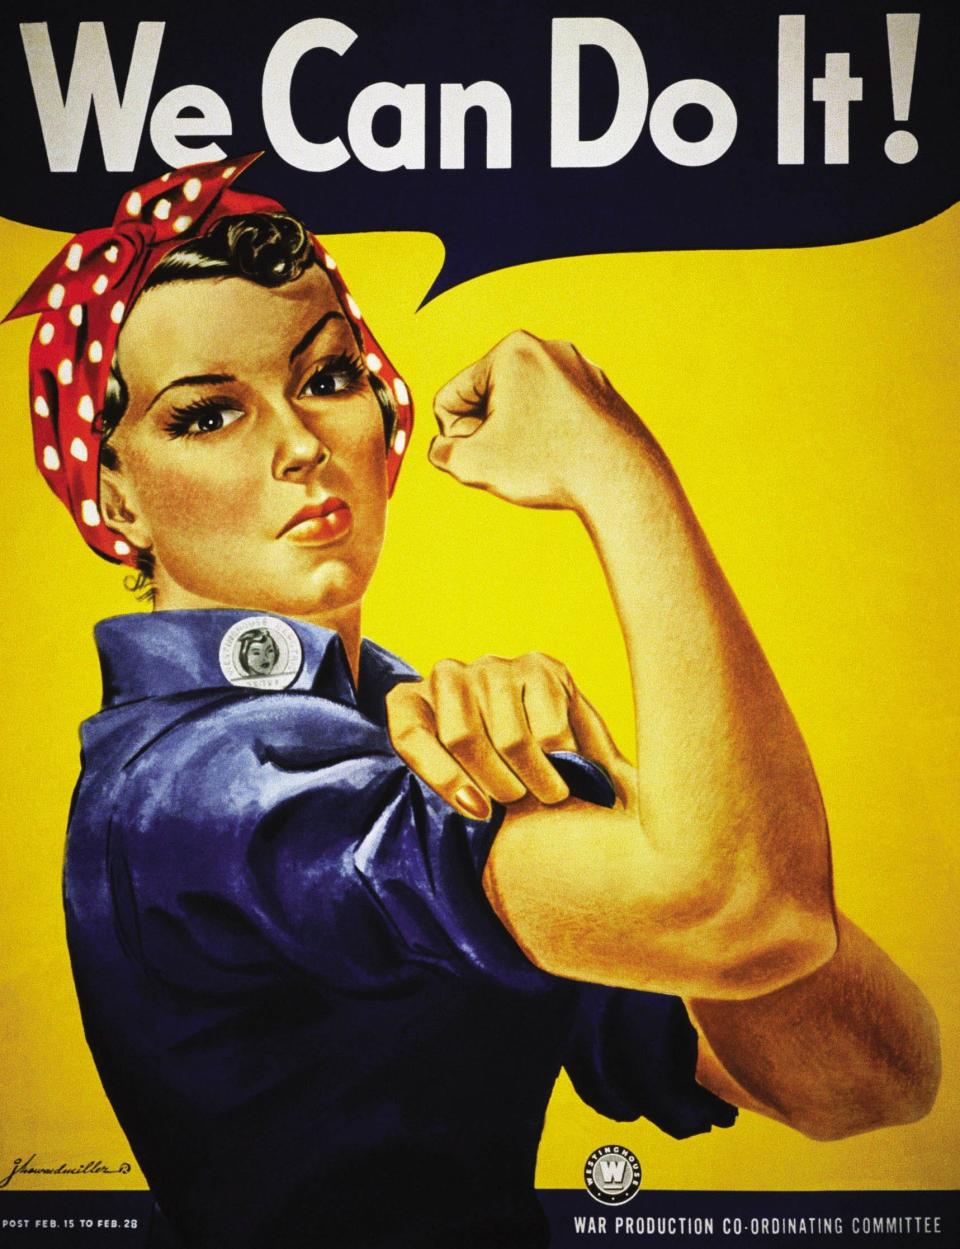 This poster symbolized all U.S. women who worked in manufacturing jobs to support the World War II effort.